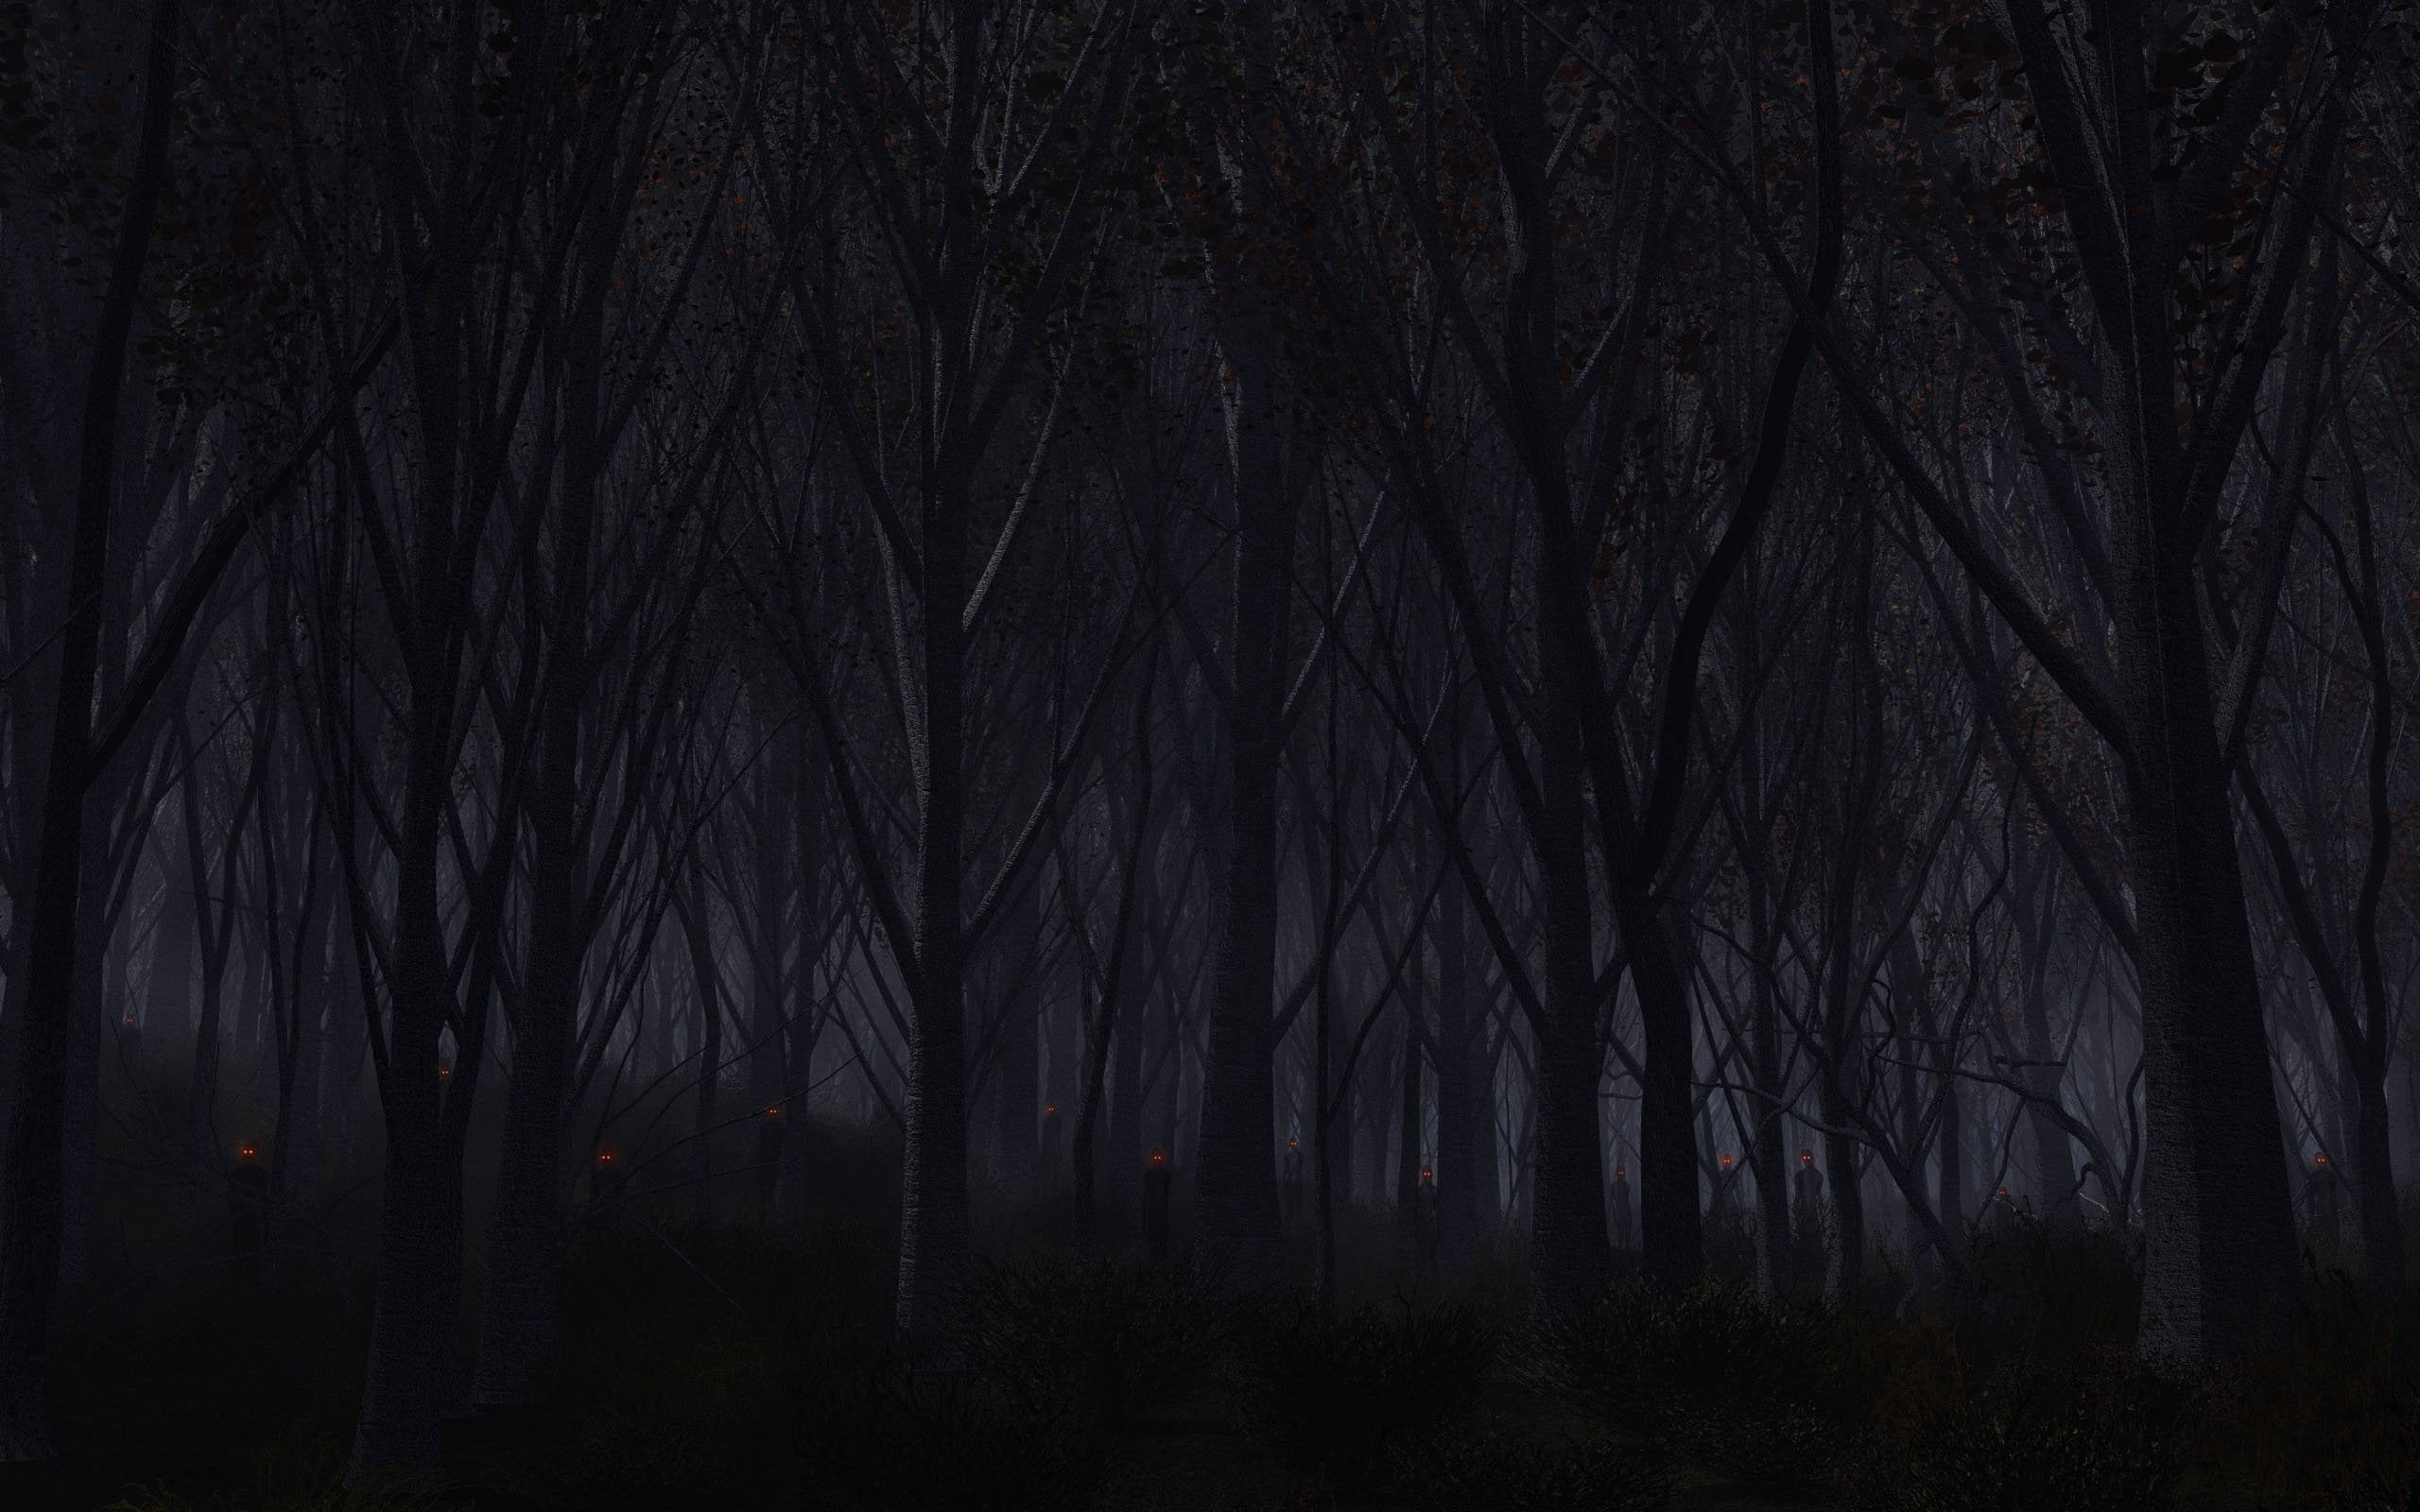 forest during night, trees, background, dark, nature, winter